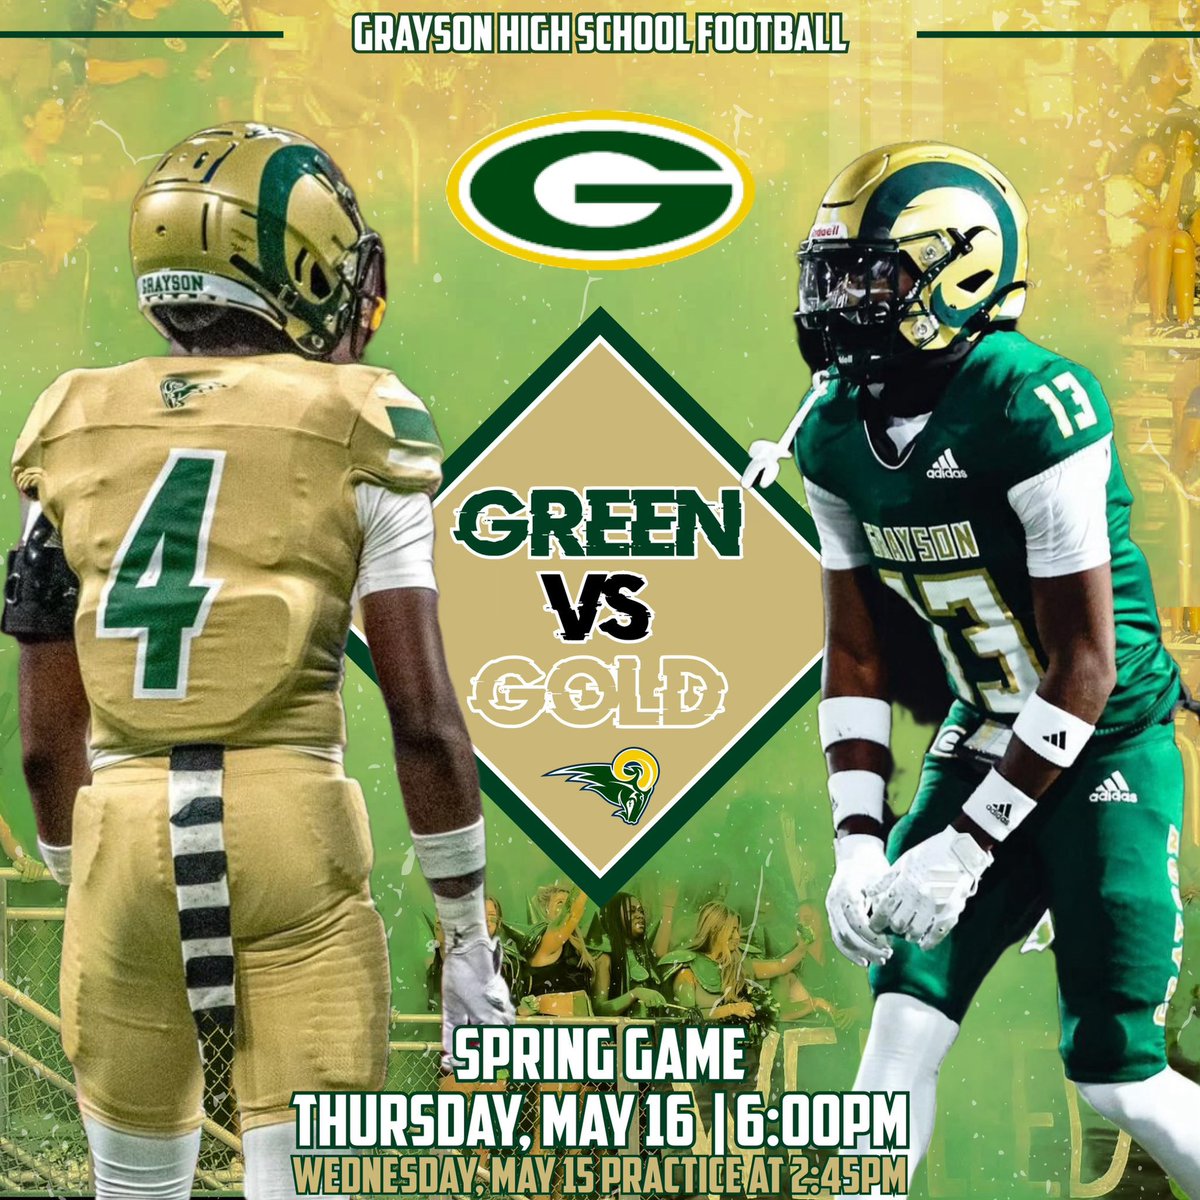 TOMORROW NIGHT IT’S GONNA GET ACTIVE 🔰🔰🔰🔰🔰🔰🔰🔰🔰🔰🔰 6pm Grayson High !